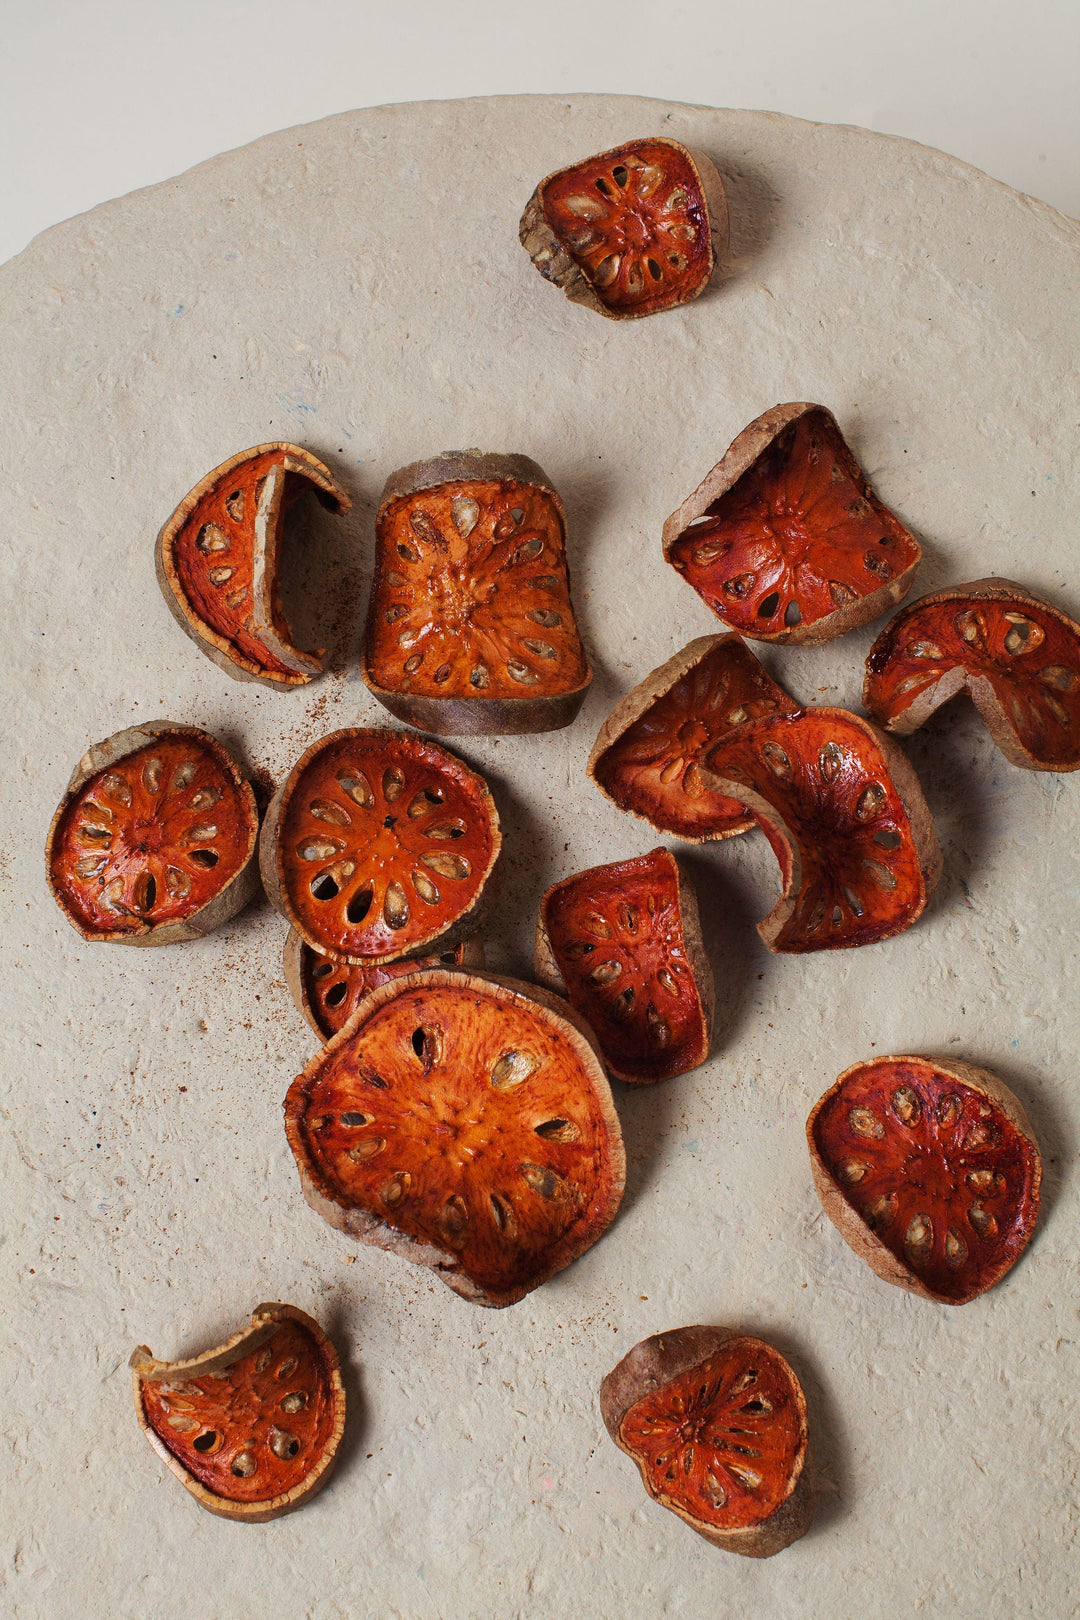 Idlewild Floral Co. Dried Quince Slices